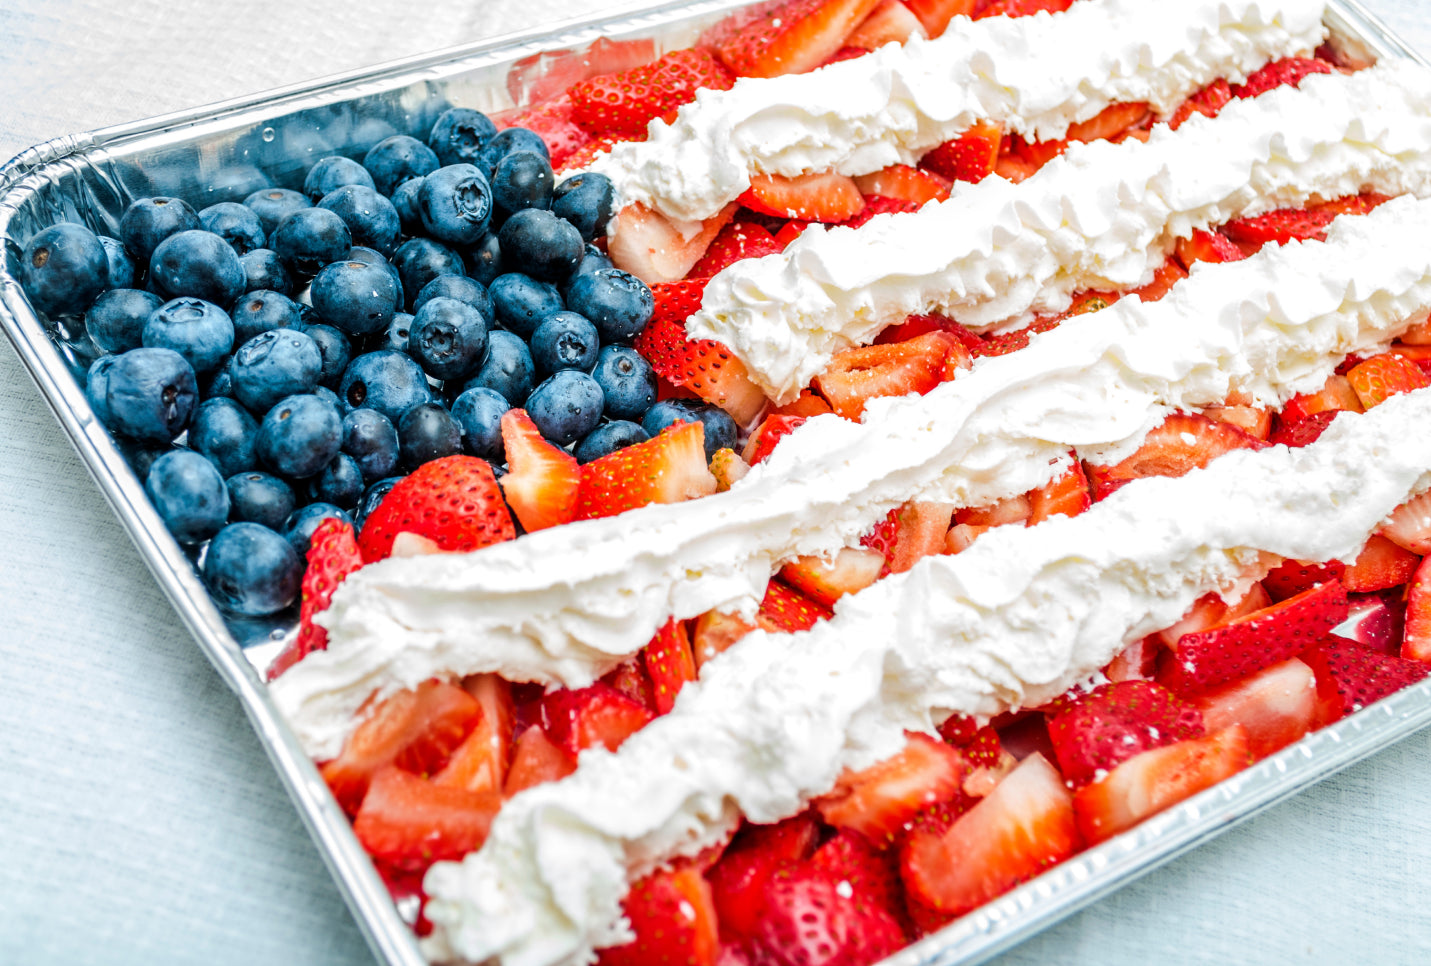 4th of July Themed Desserts To Keep You Cool